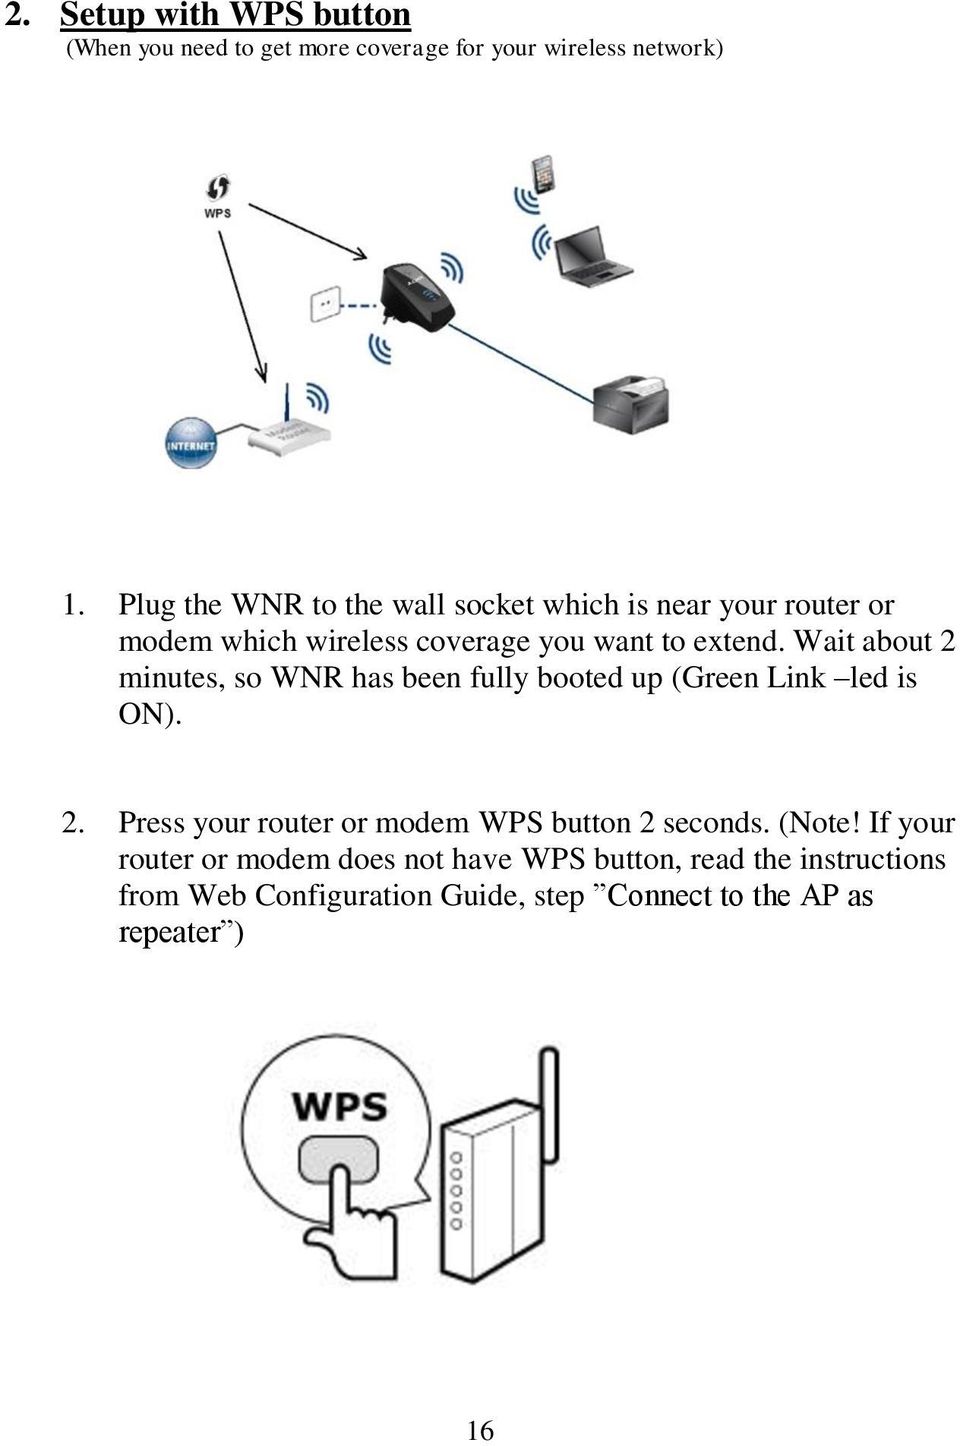 Wait about 2 minutes, so WNR has been fully booted up (Green Link led is ON). 2. Press your router or modem WPS button 2 seconds.